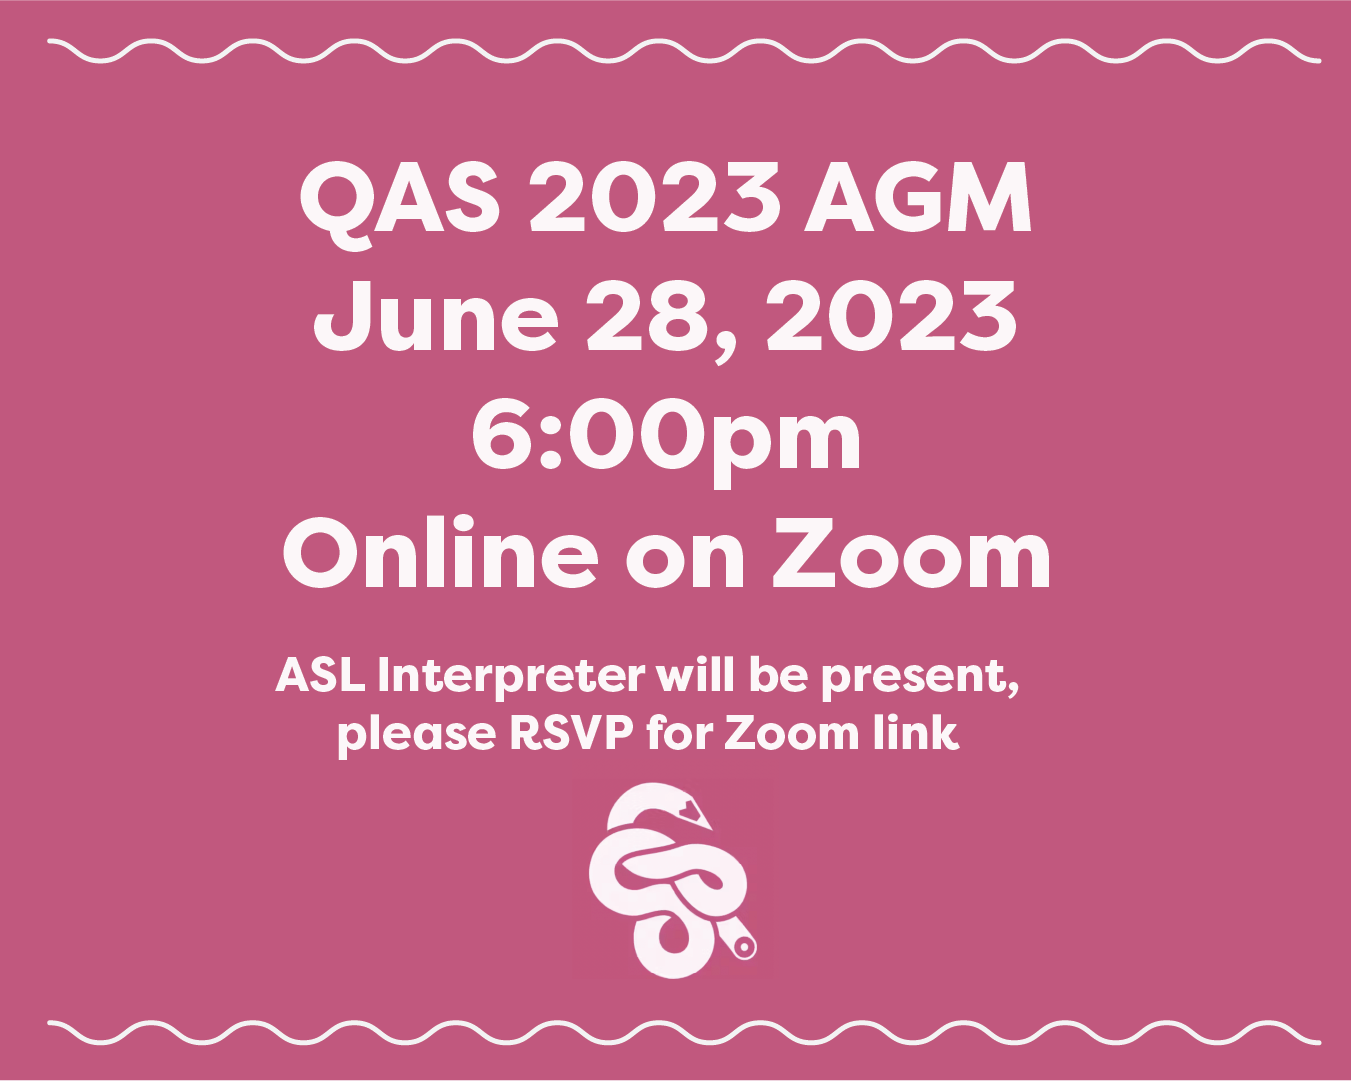 Image with text: 

"QAS 2023 AGM
June 28, 2023
6:00pm 
Online on Zoom" 

"ASL Interpreter will be present, please RSVP for Zoom link"

and the quickdraw logo at the bottom